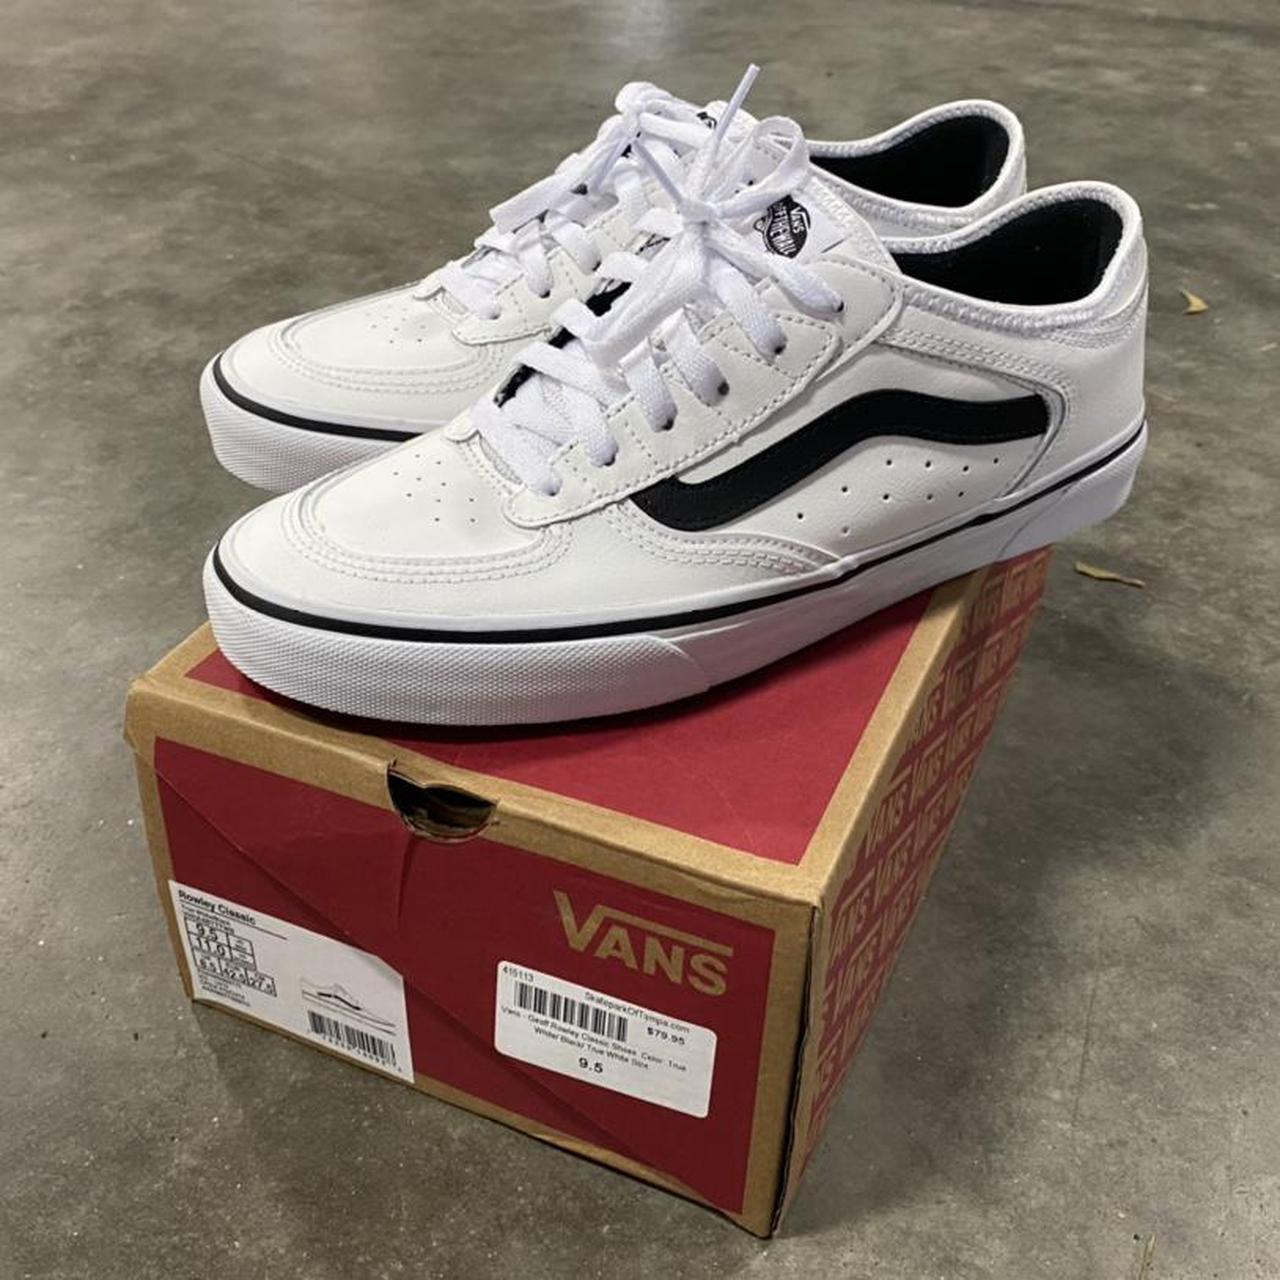 Vans Men's White and Black Trainers